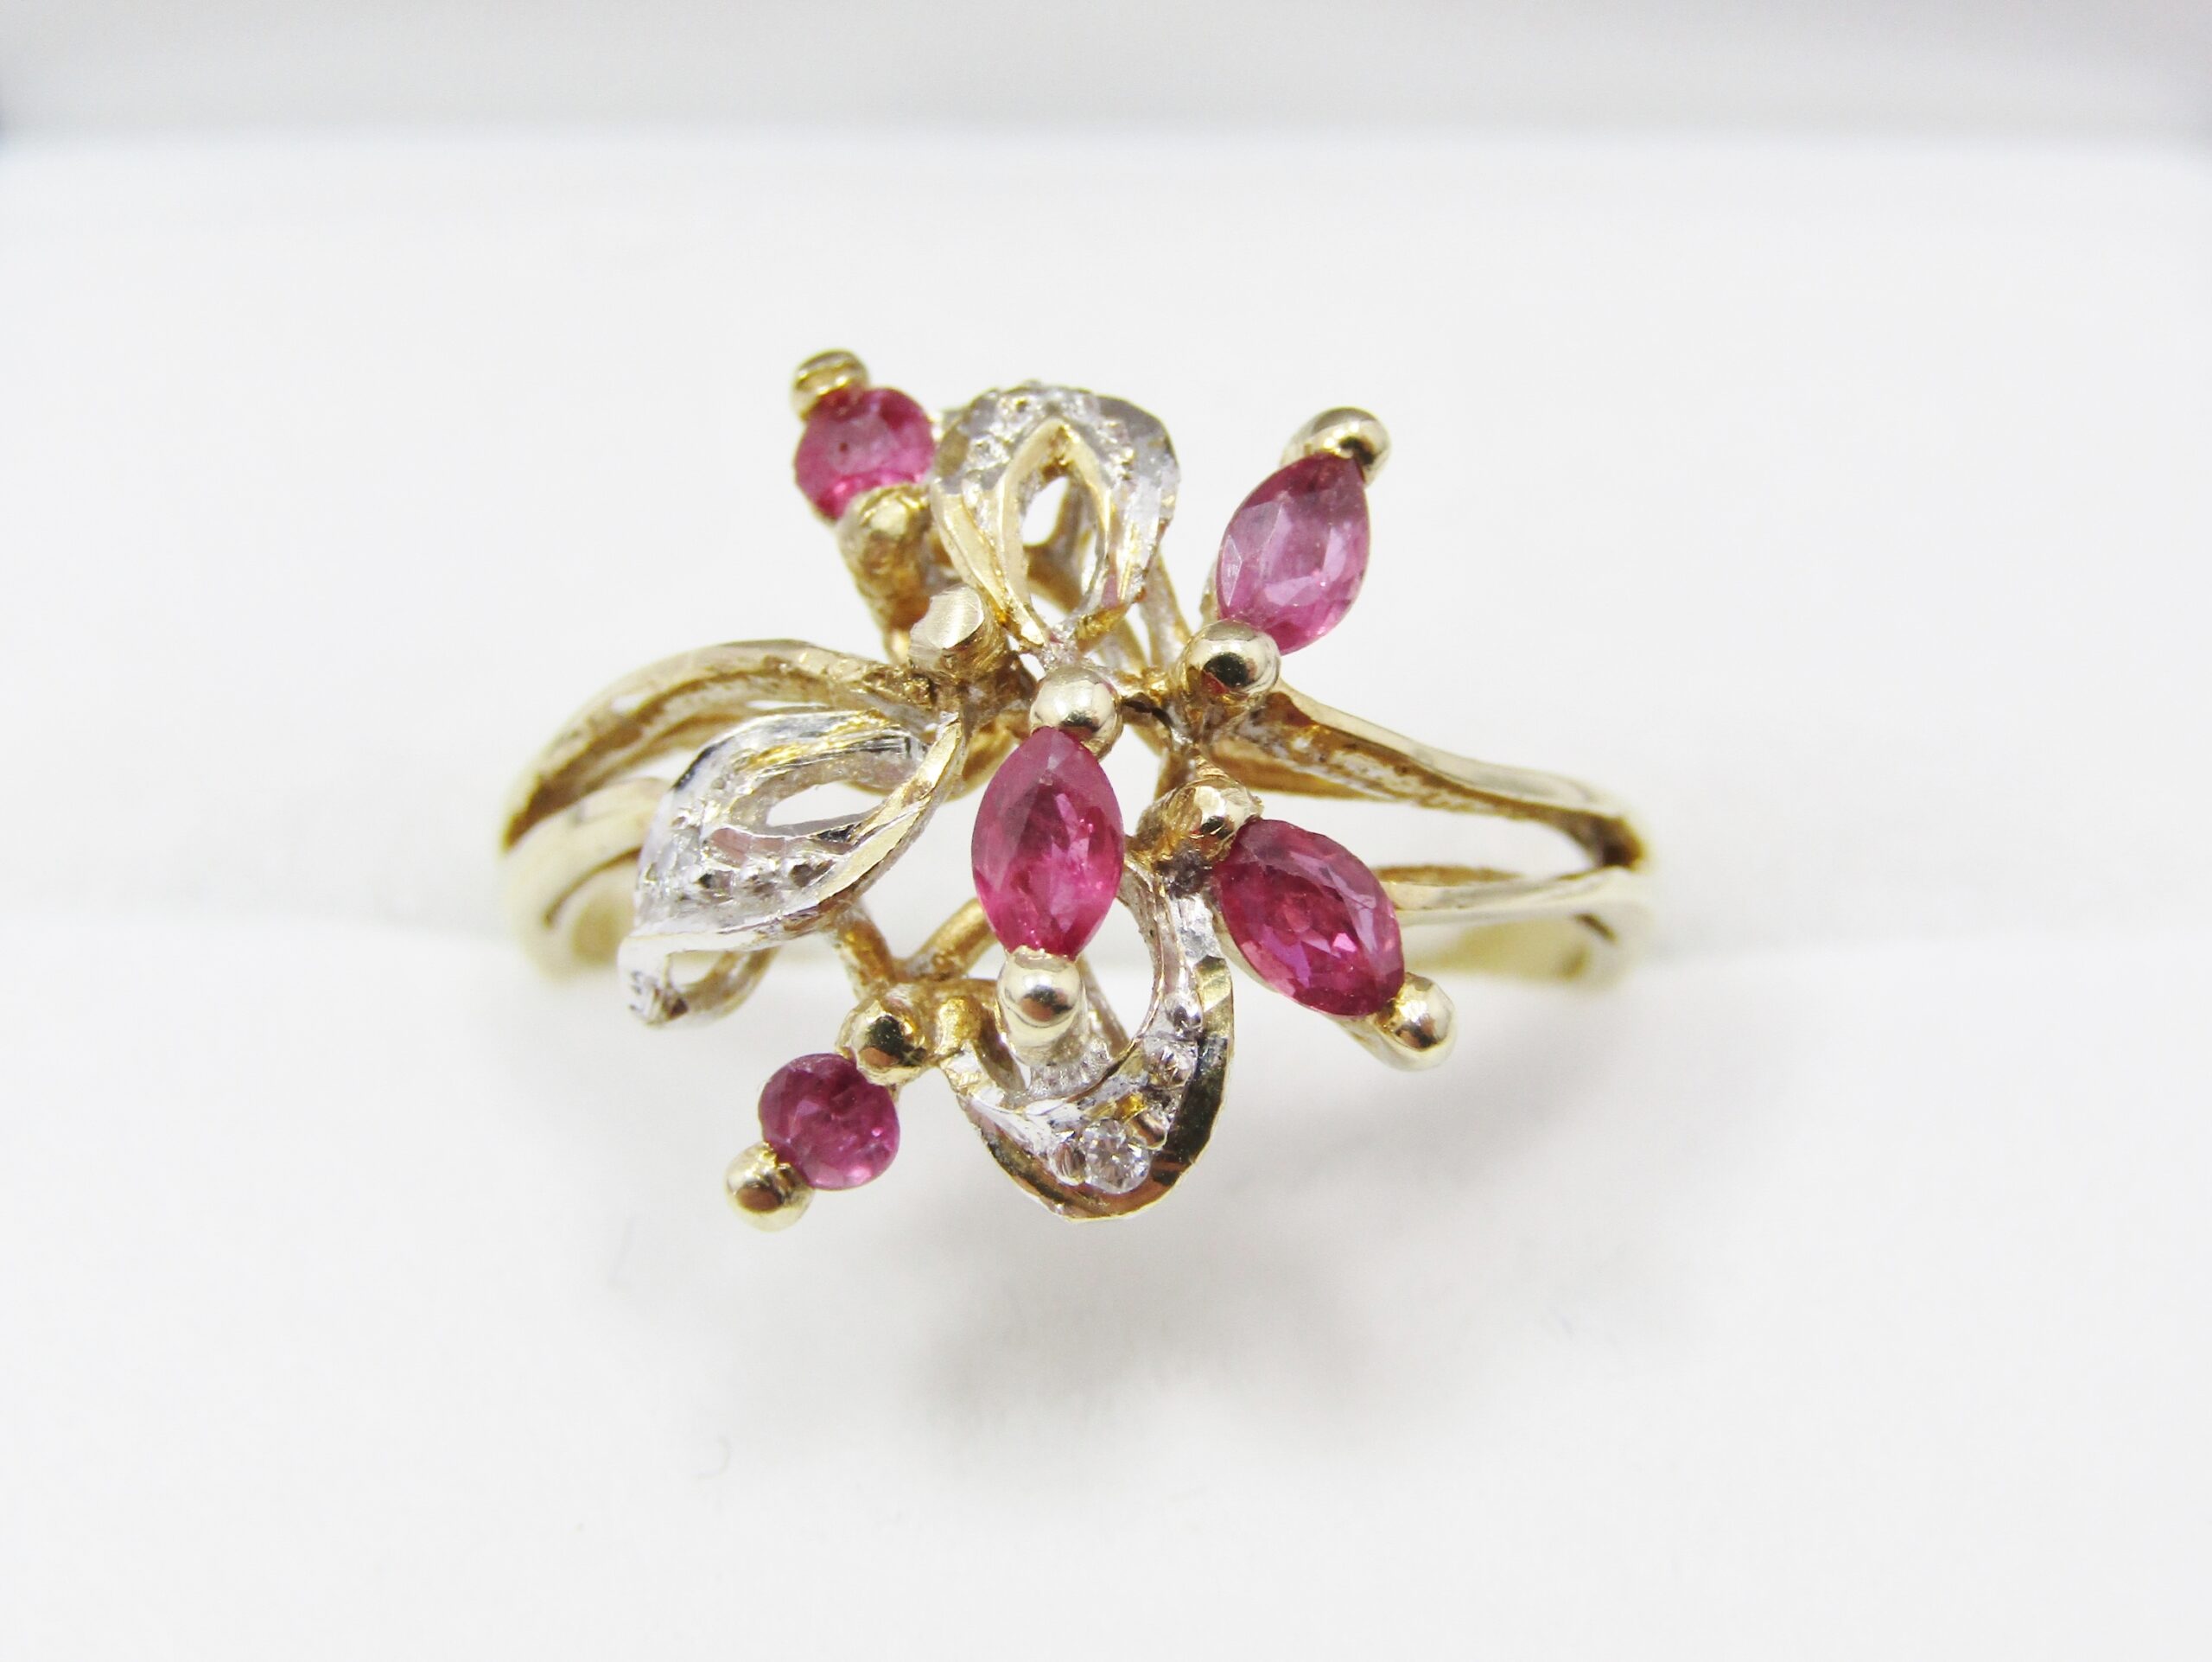 A Beautiful Vintage Design Ruby Ring in 14ct Gold